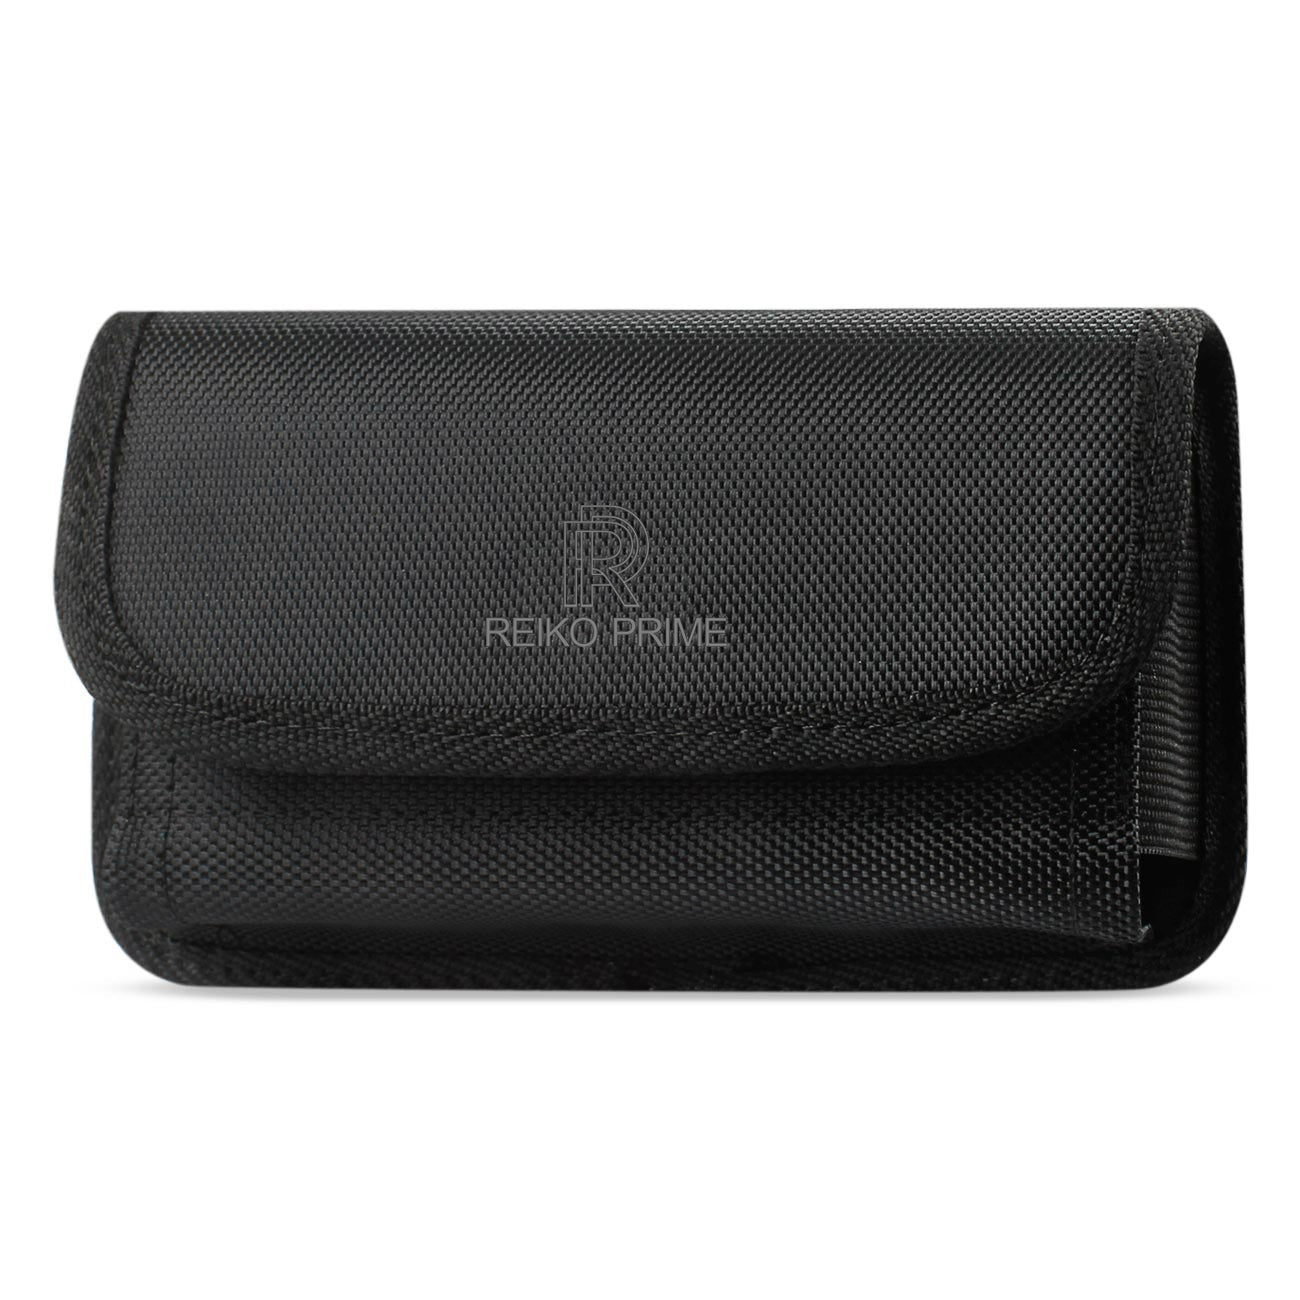 Horizontal Rugged Pouch/Phone Holster With Engraved Logo, Velcro, And Metal Belt Clip In Black